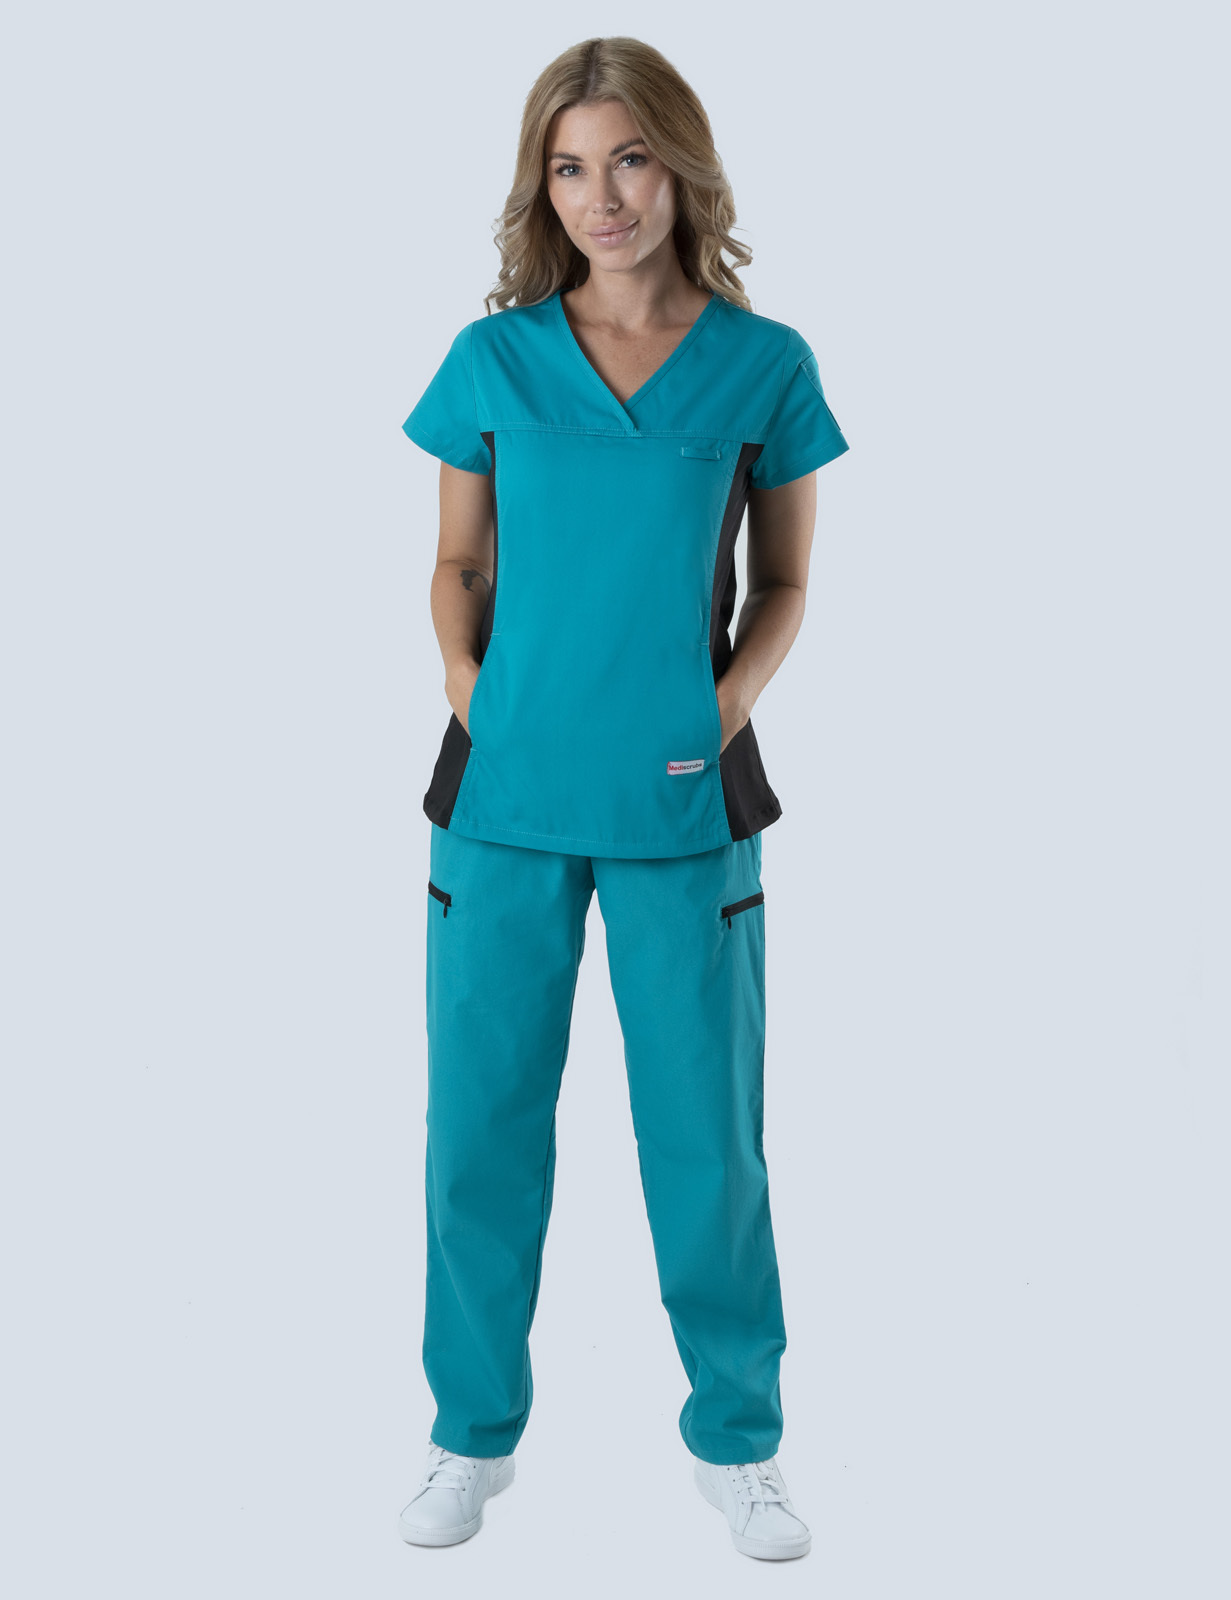 Women's Fit Solid Scrub Top With Spandex Panel - Teal - 4X large